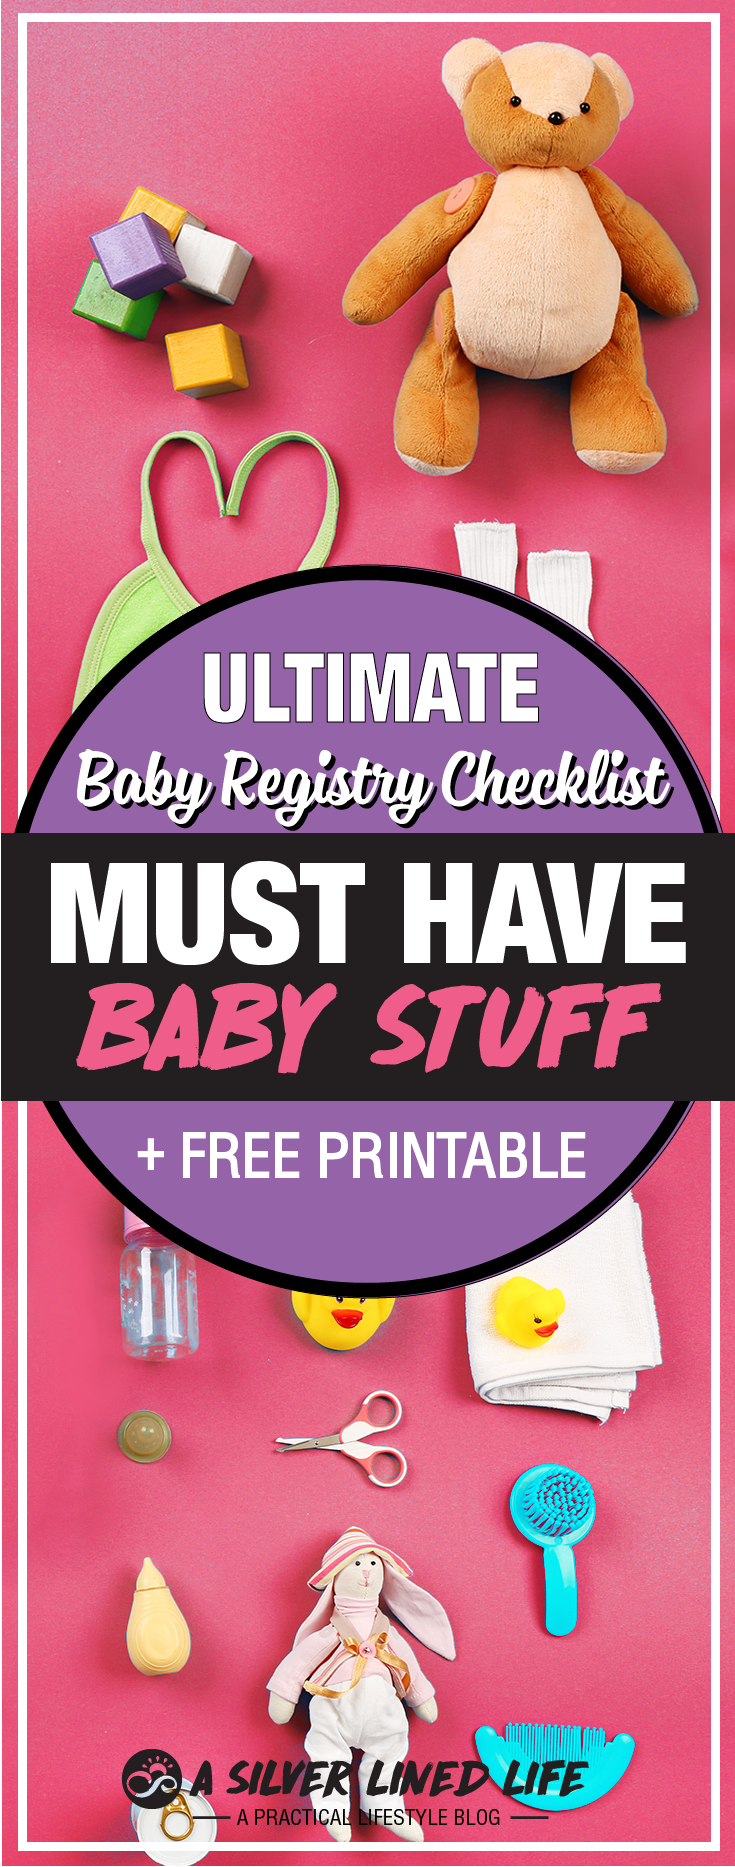 The Ultimate Target Baby Registry Checklist